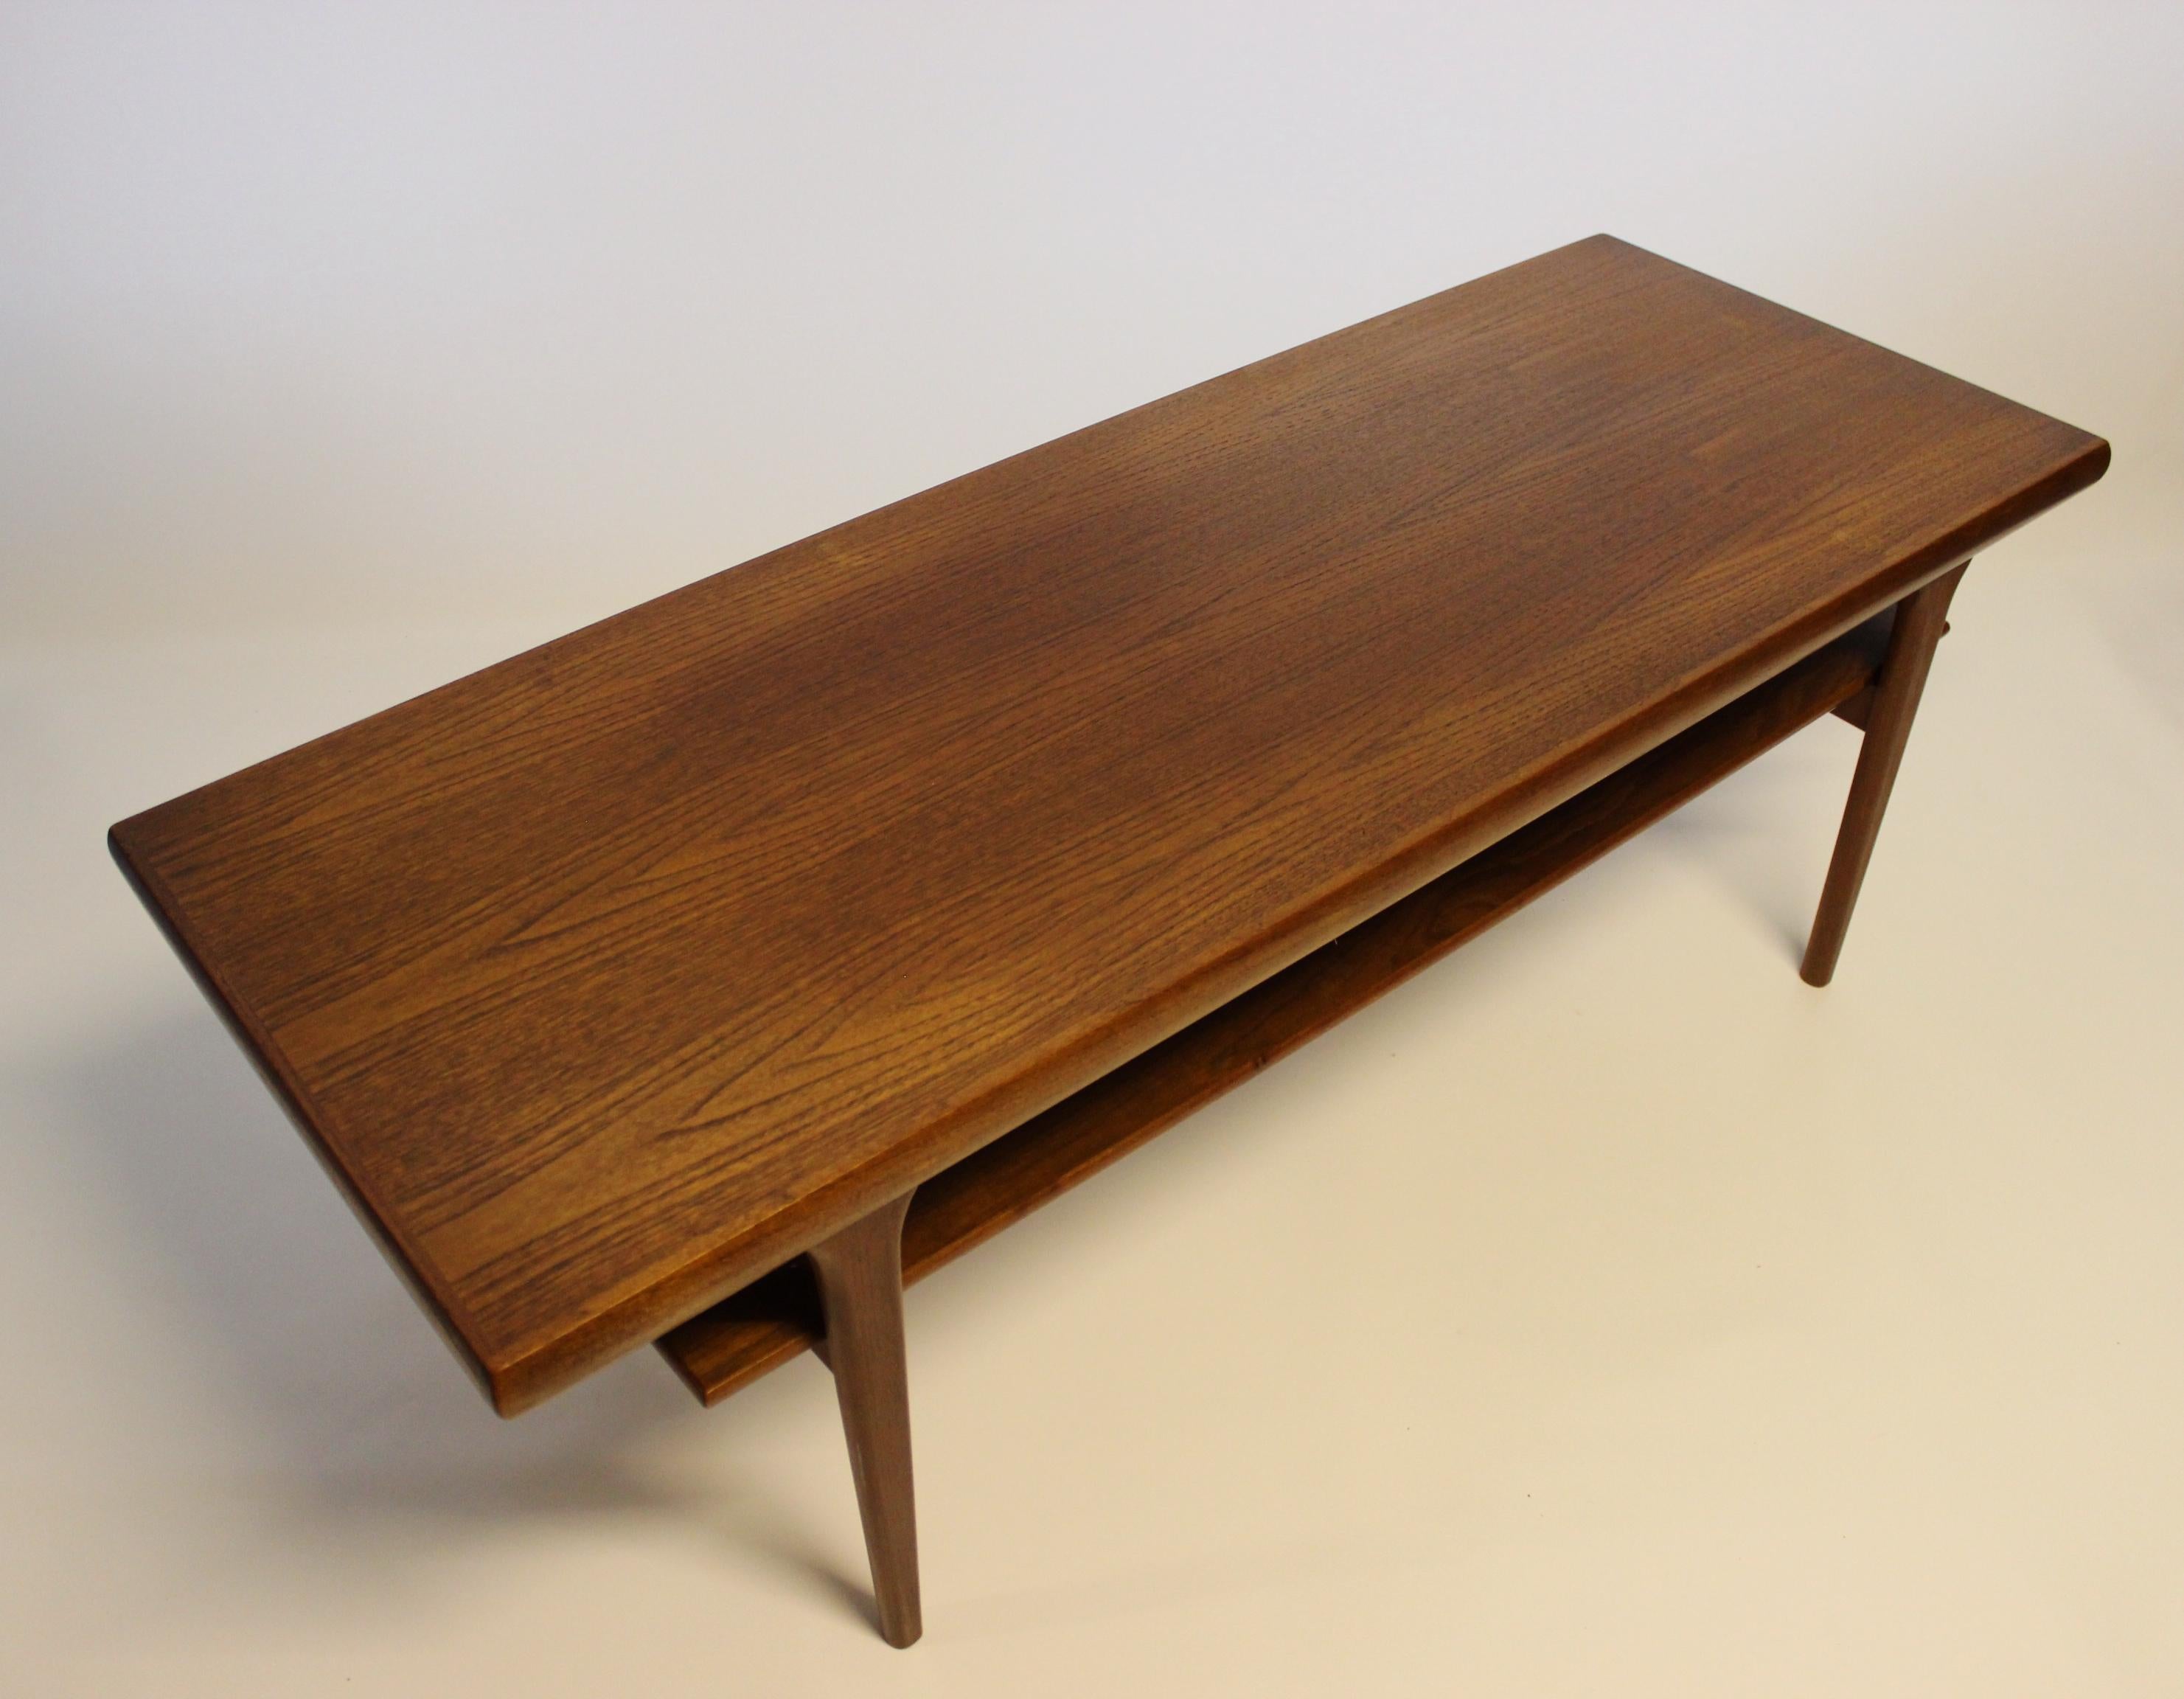 Coffee Table with Shelf in Teak of Danish Design from the 1960s For Sale 2